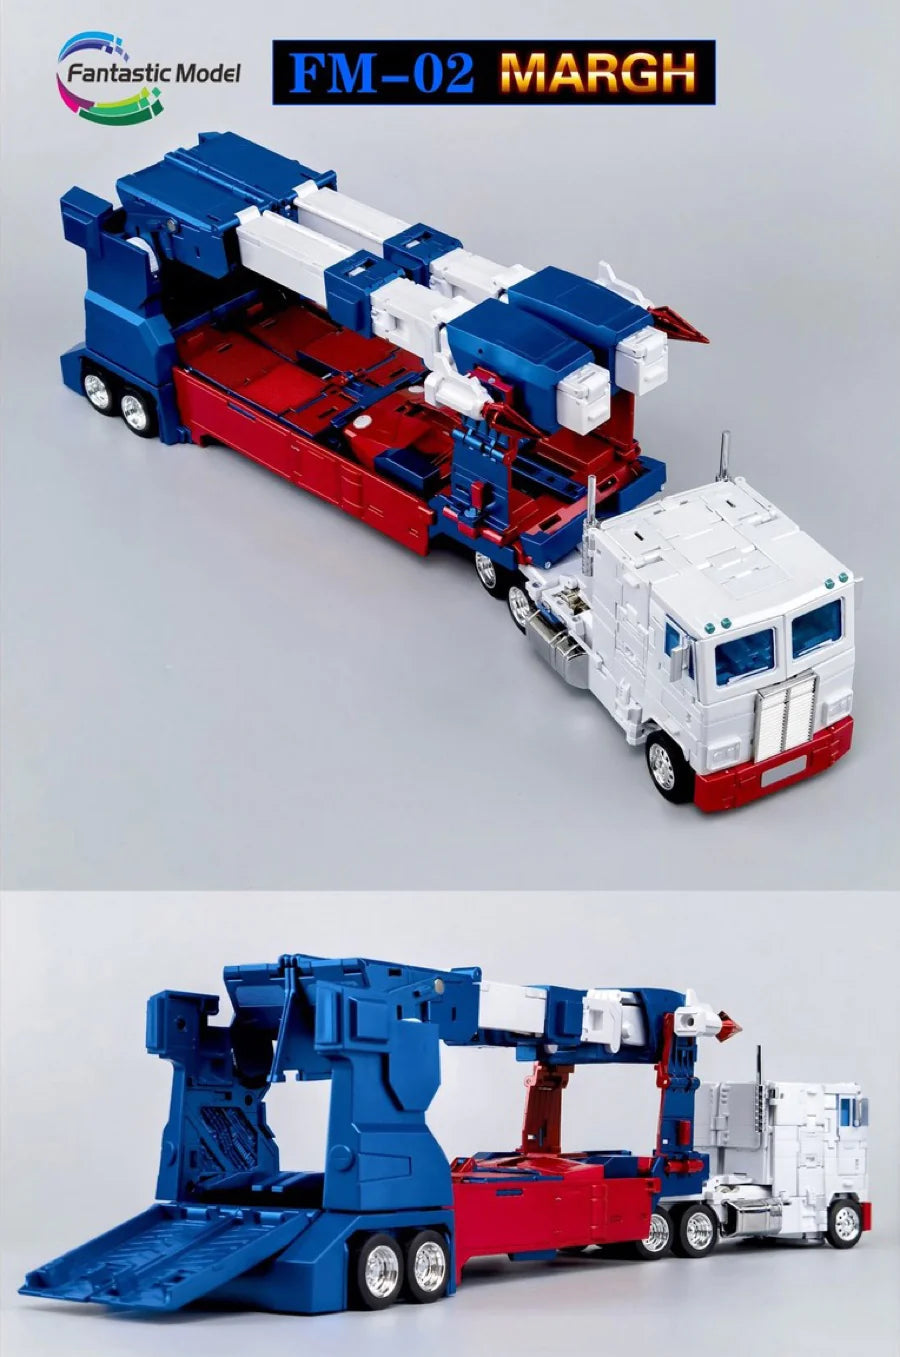 Transformers Fantastic Model FM-02 (Fans Toys) Margh (Ultra Magnus) cab and trailer combined view